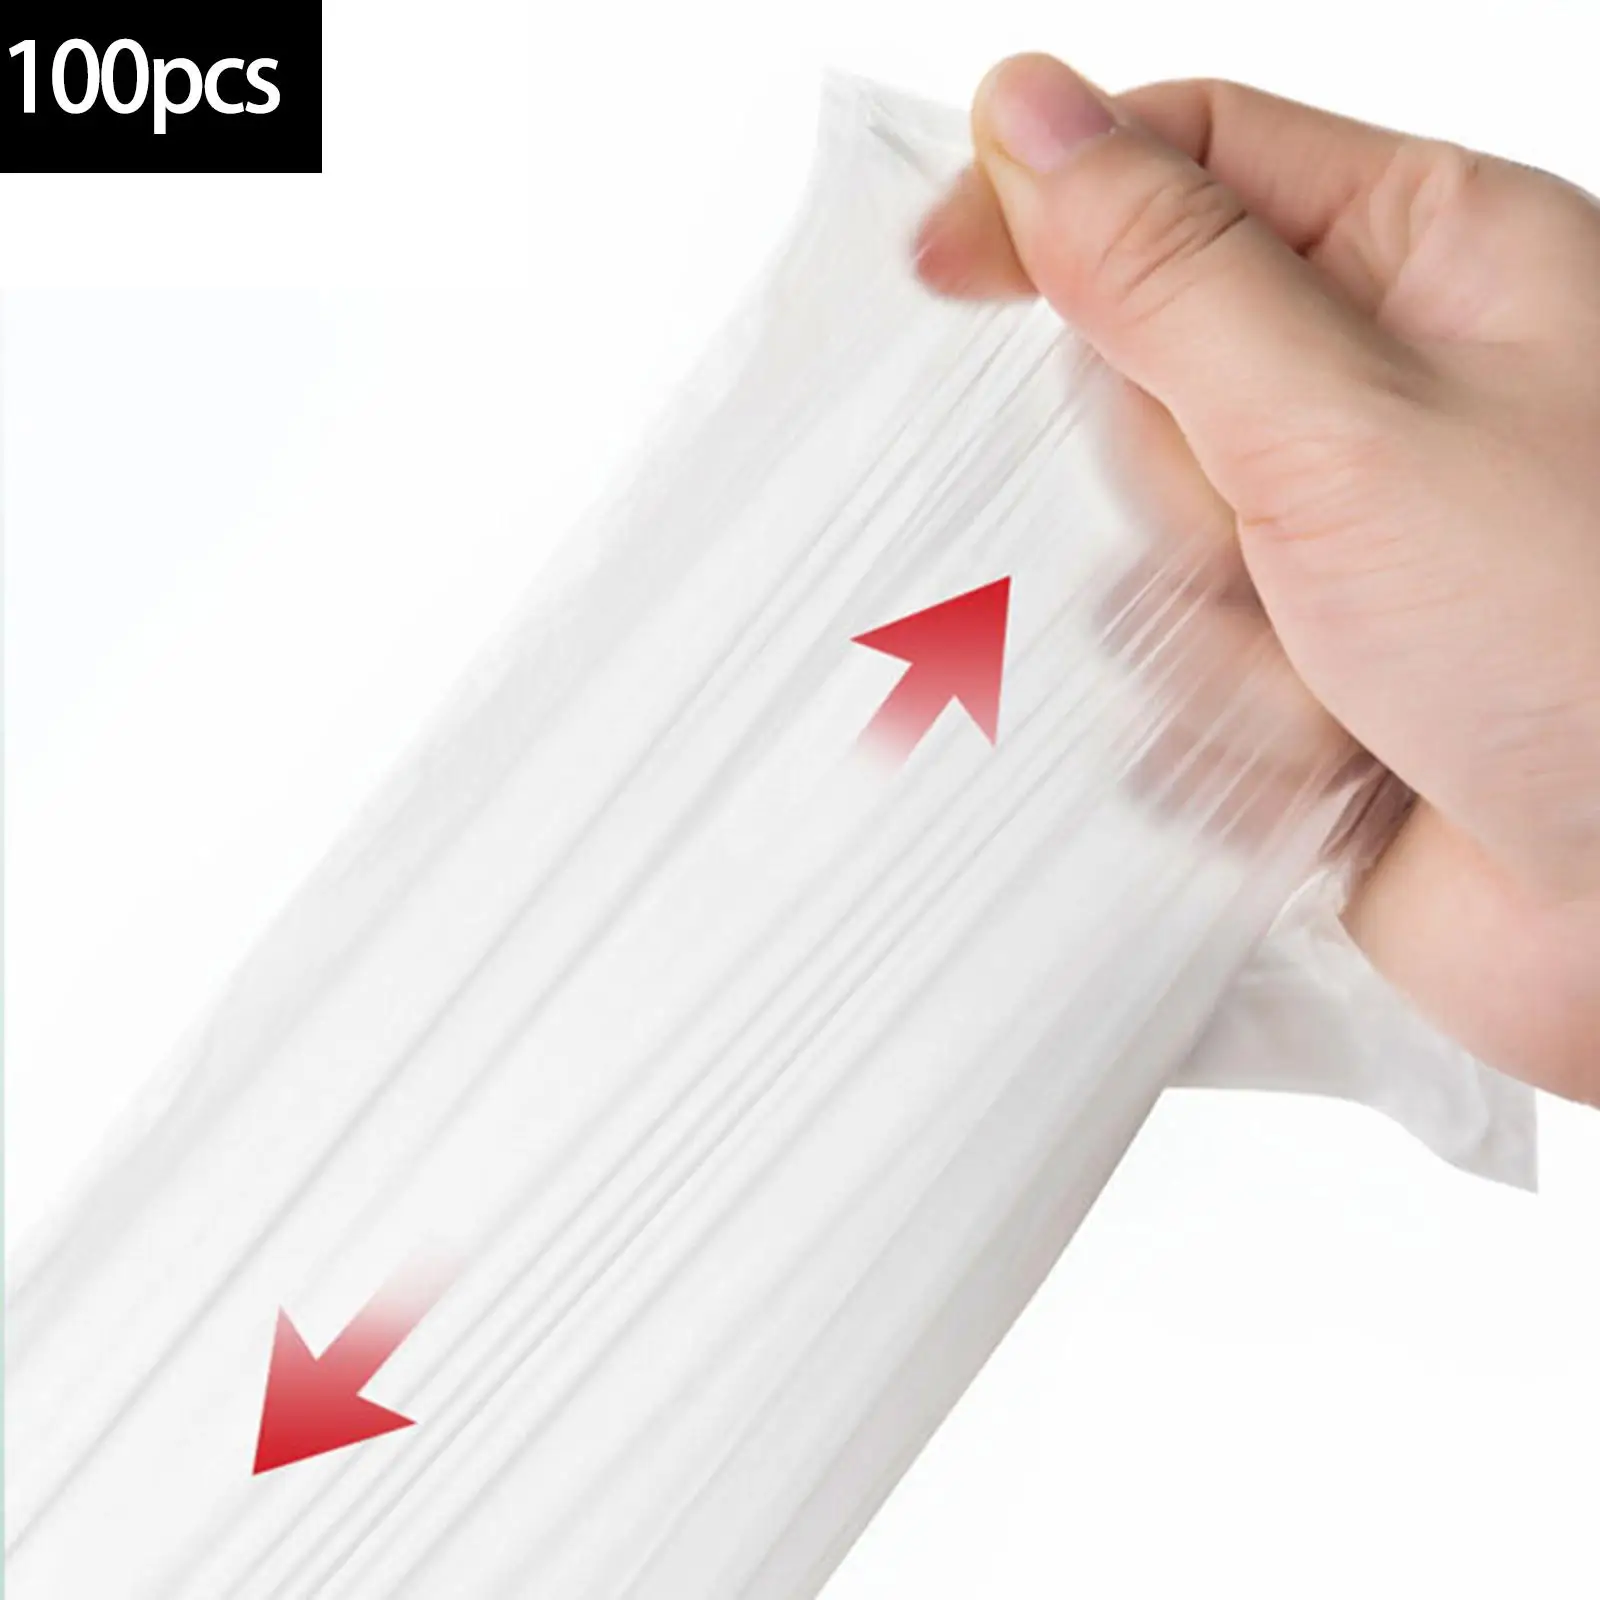 10 Rolls 100Pcs Toilet Cleaning Bag with Drawstring for Kids, Avoid Baby Touching Directly